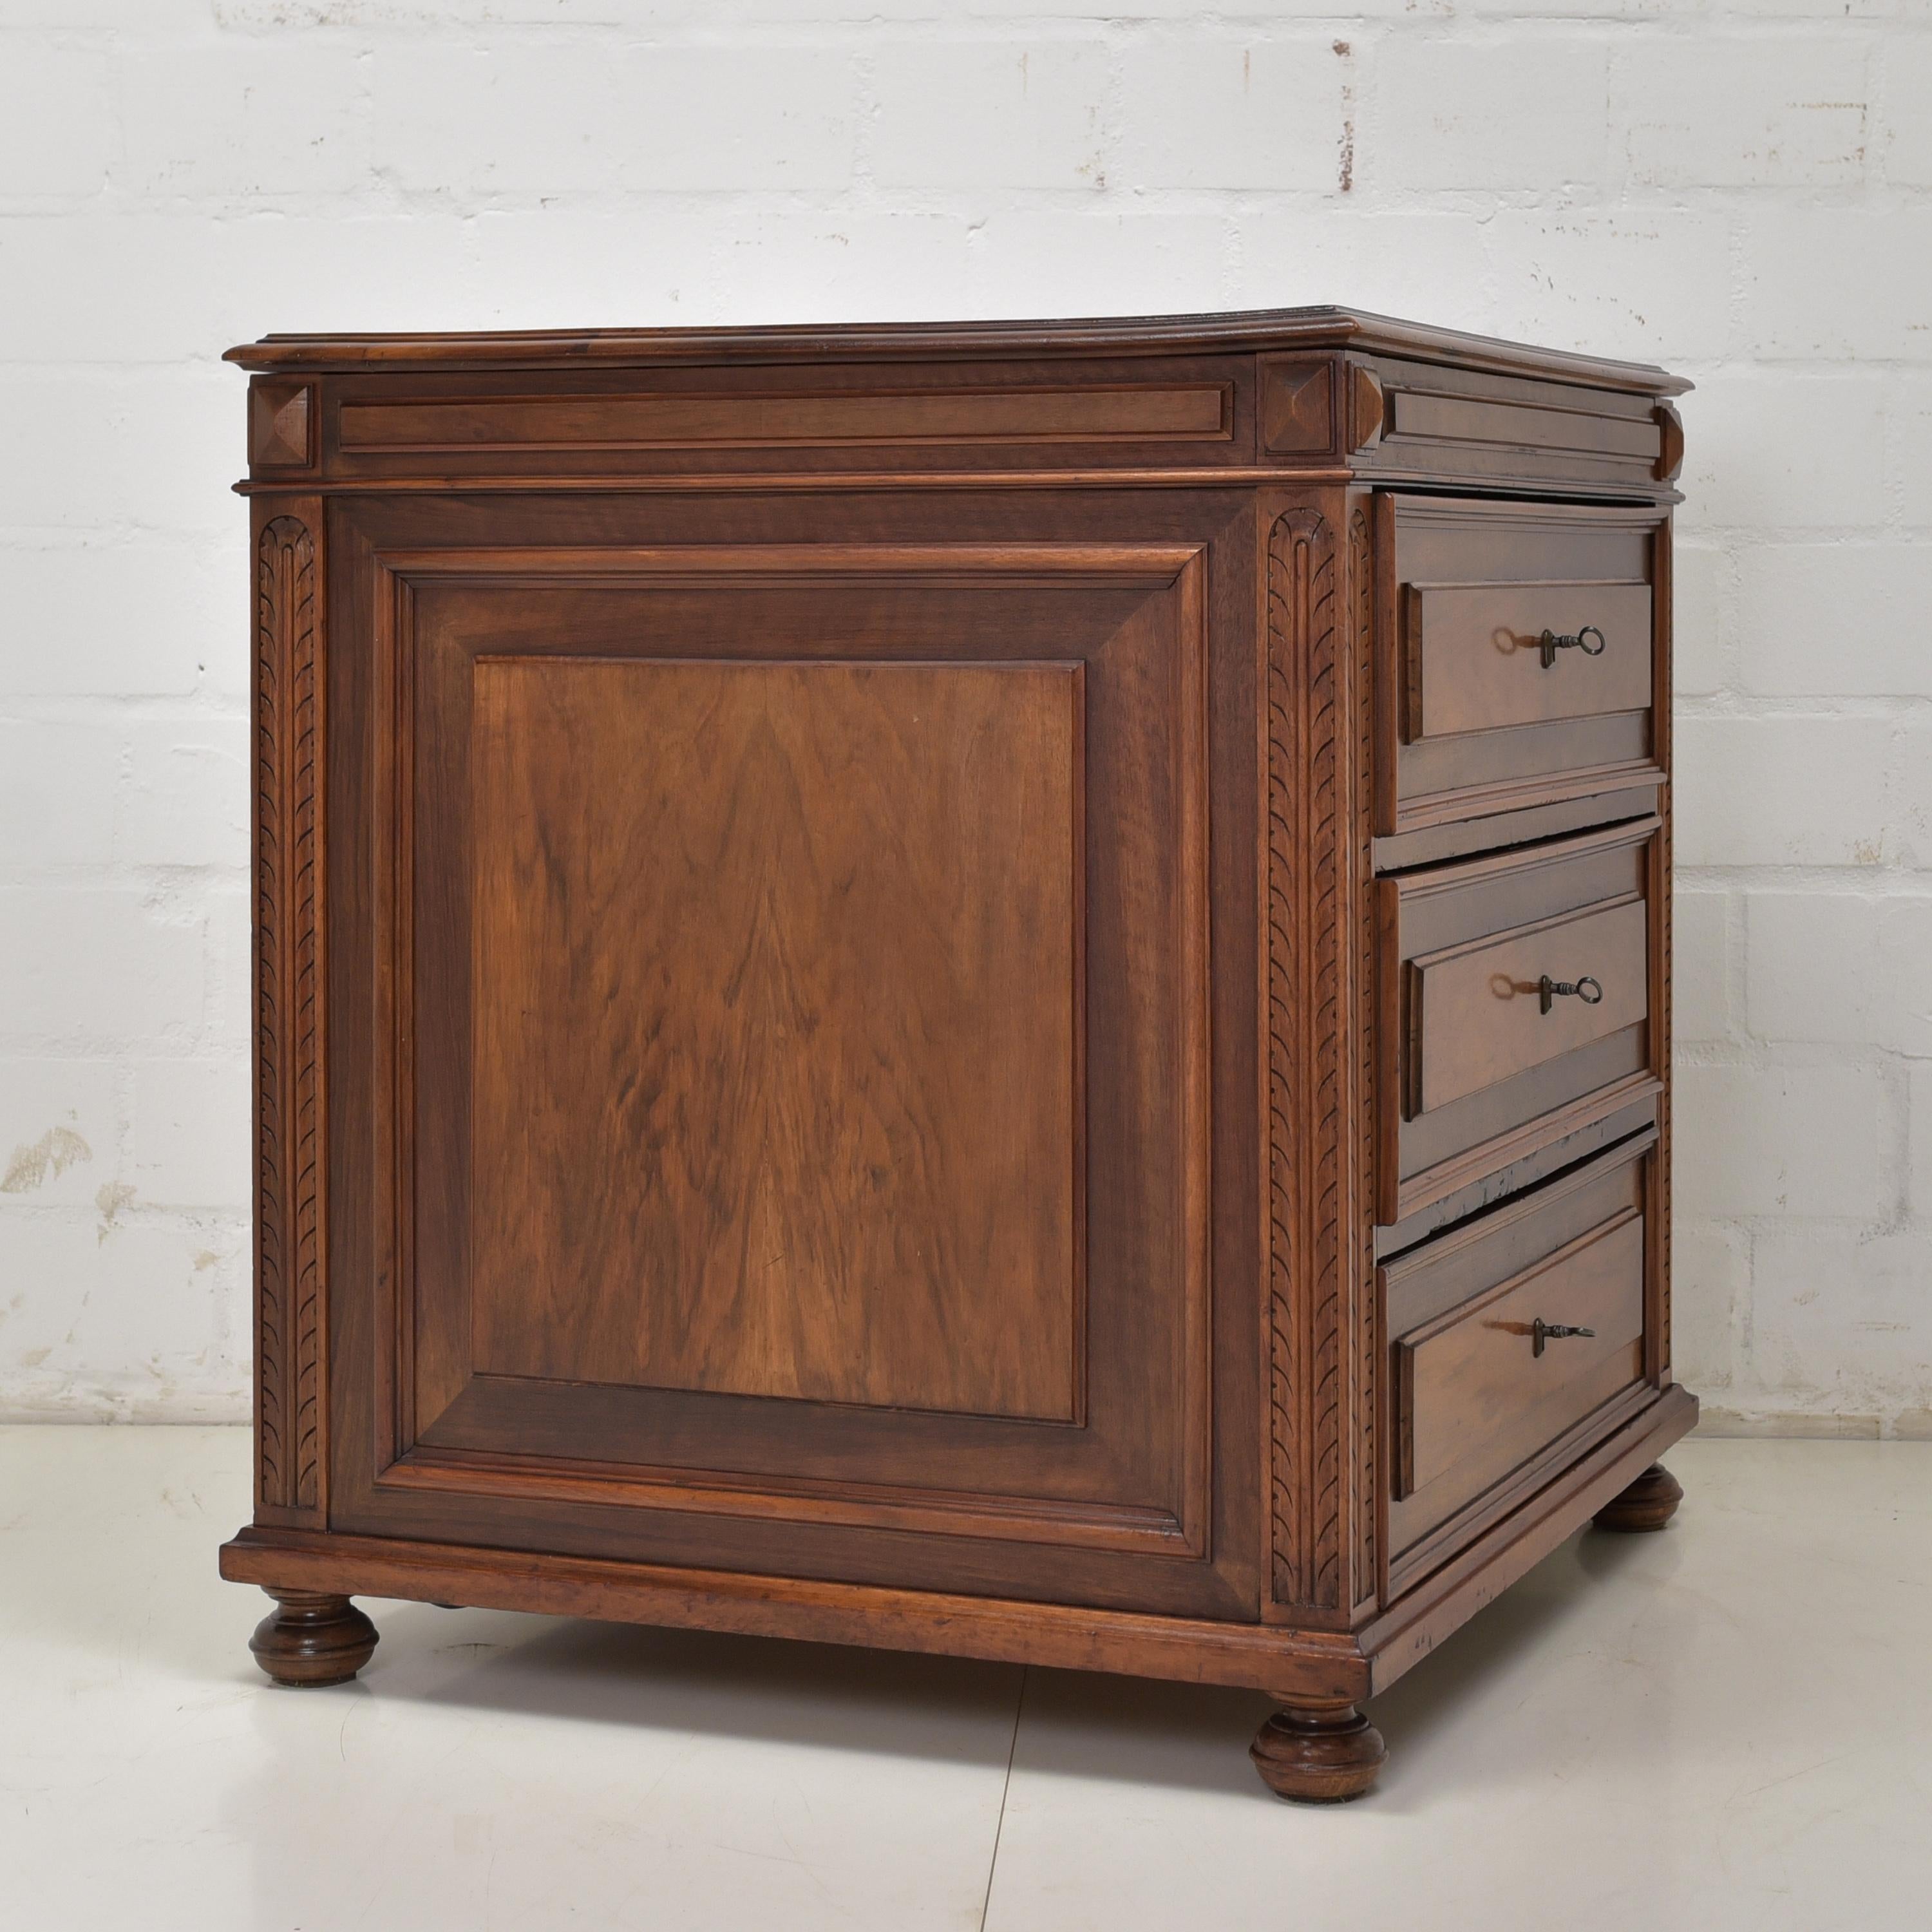 Gründerzeit Small Deep Chest of Drawers in Solid Walnut, 1900 For Sale 7